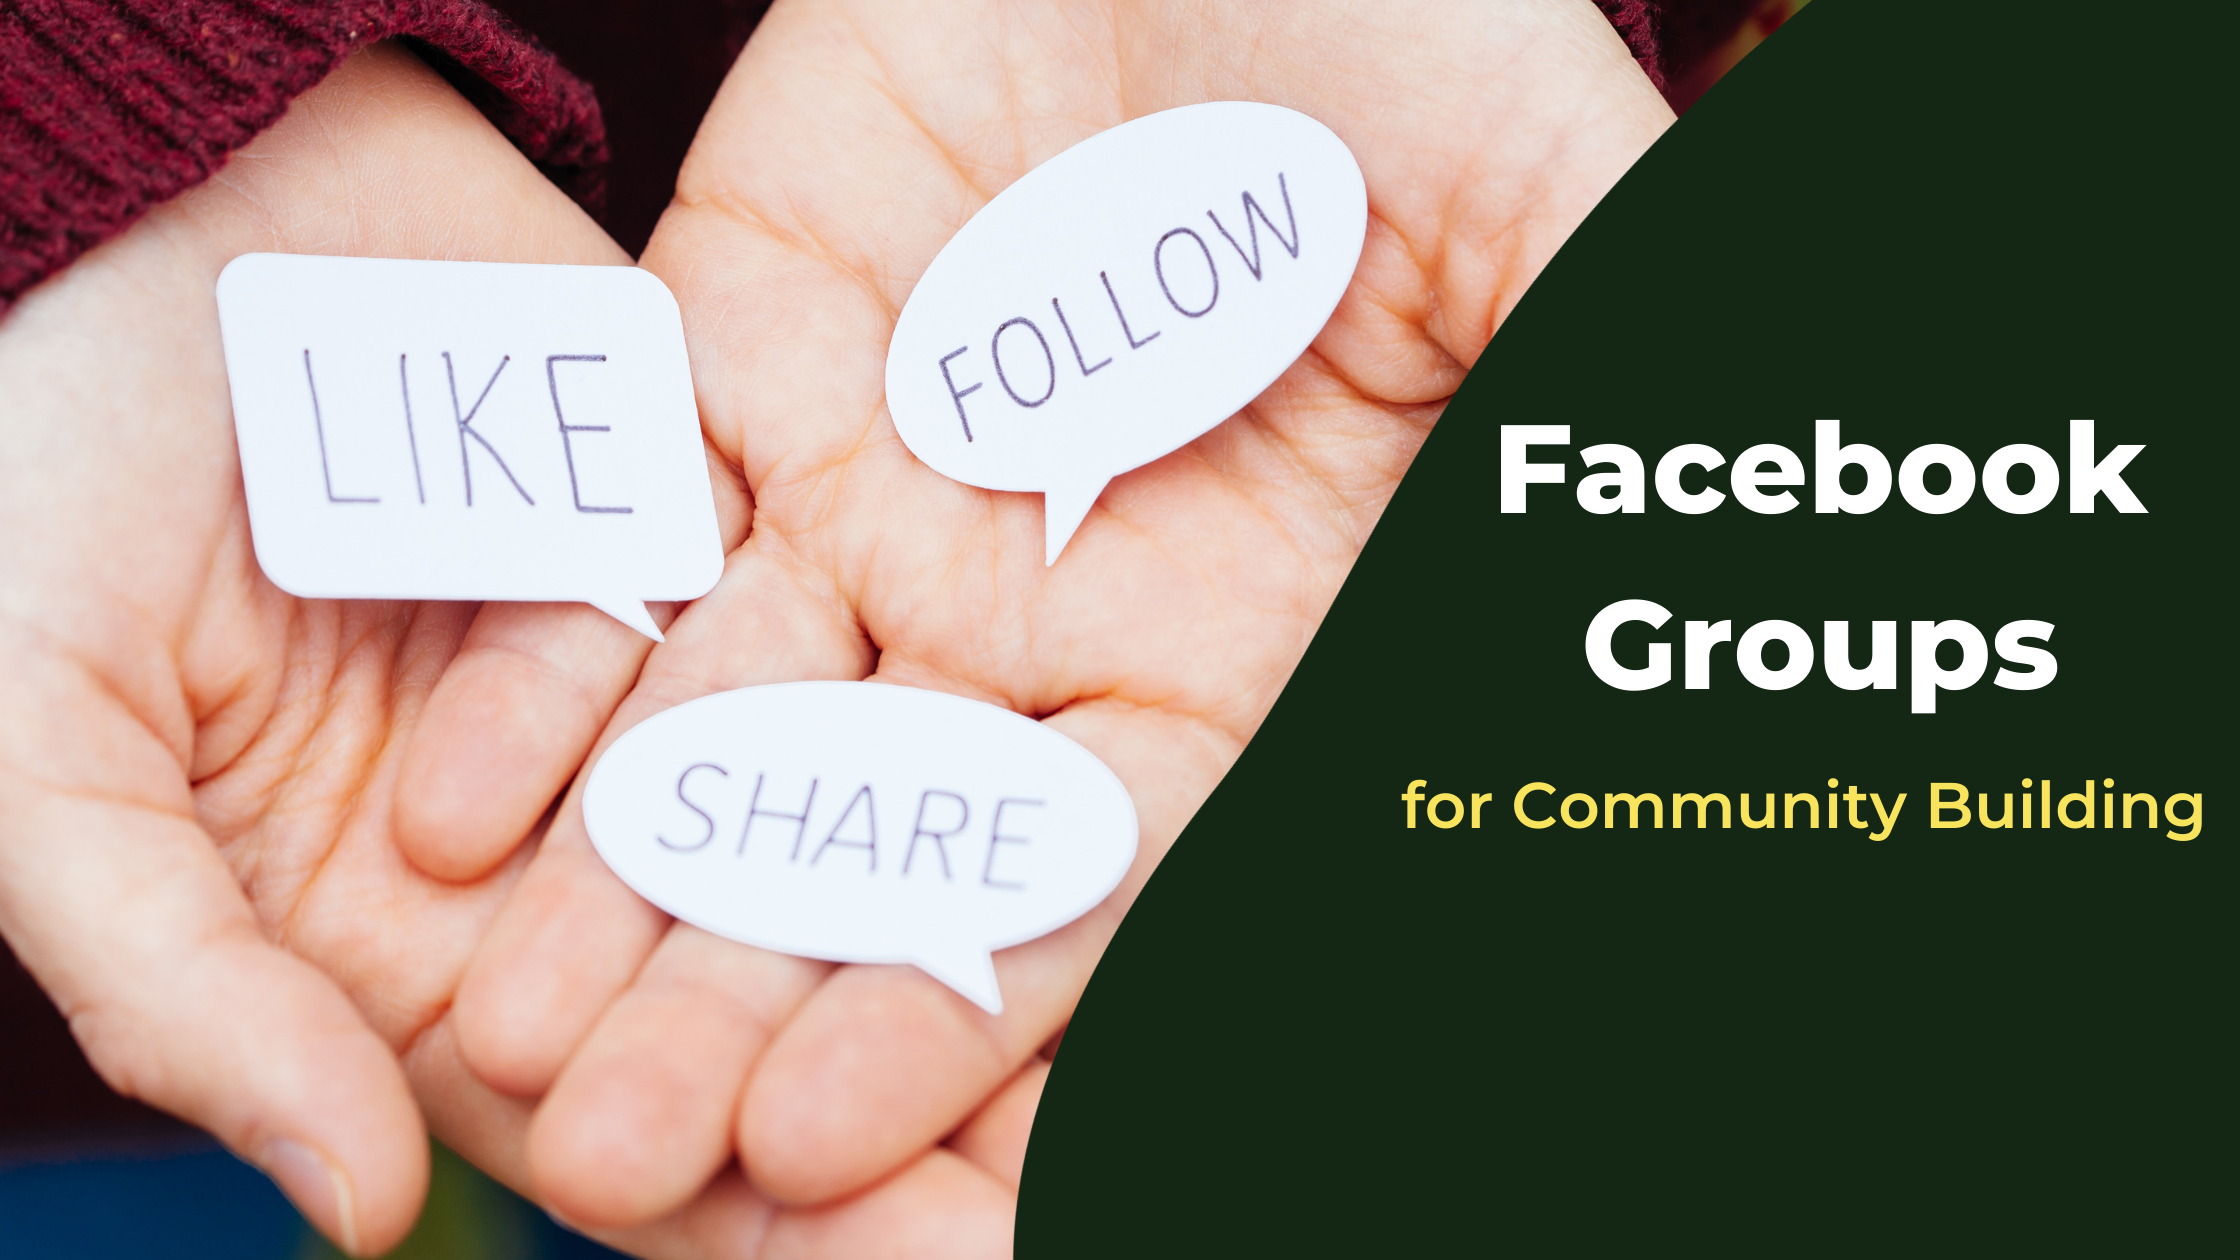 Facebook Groups for Community Building